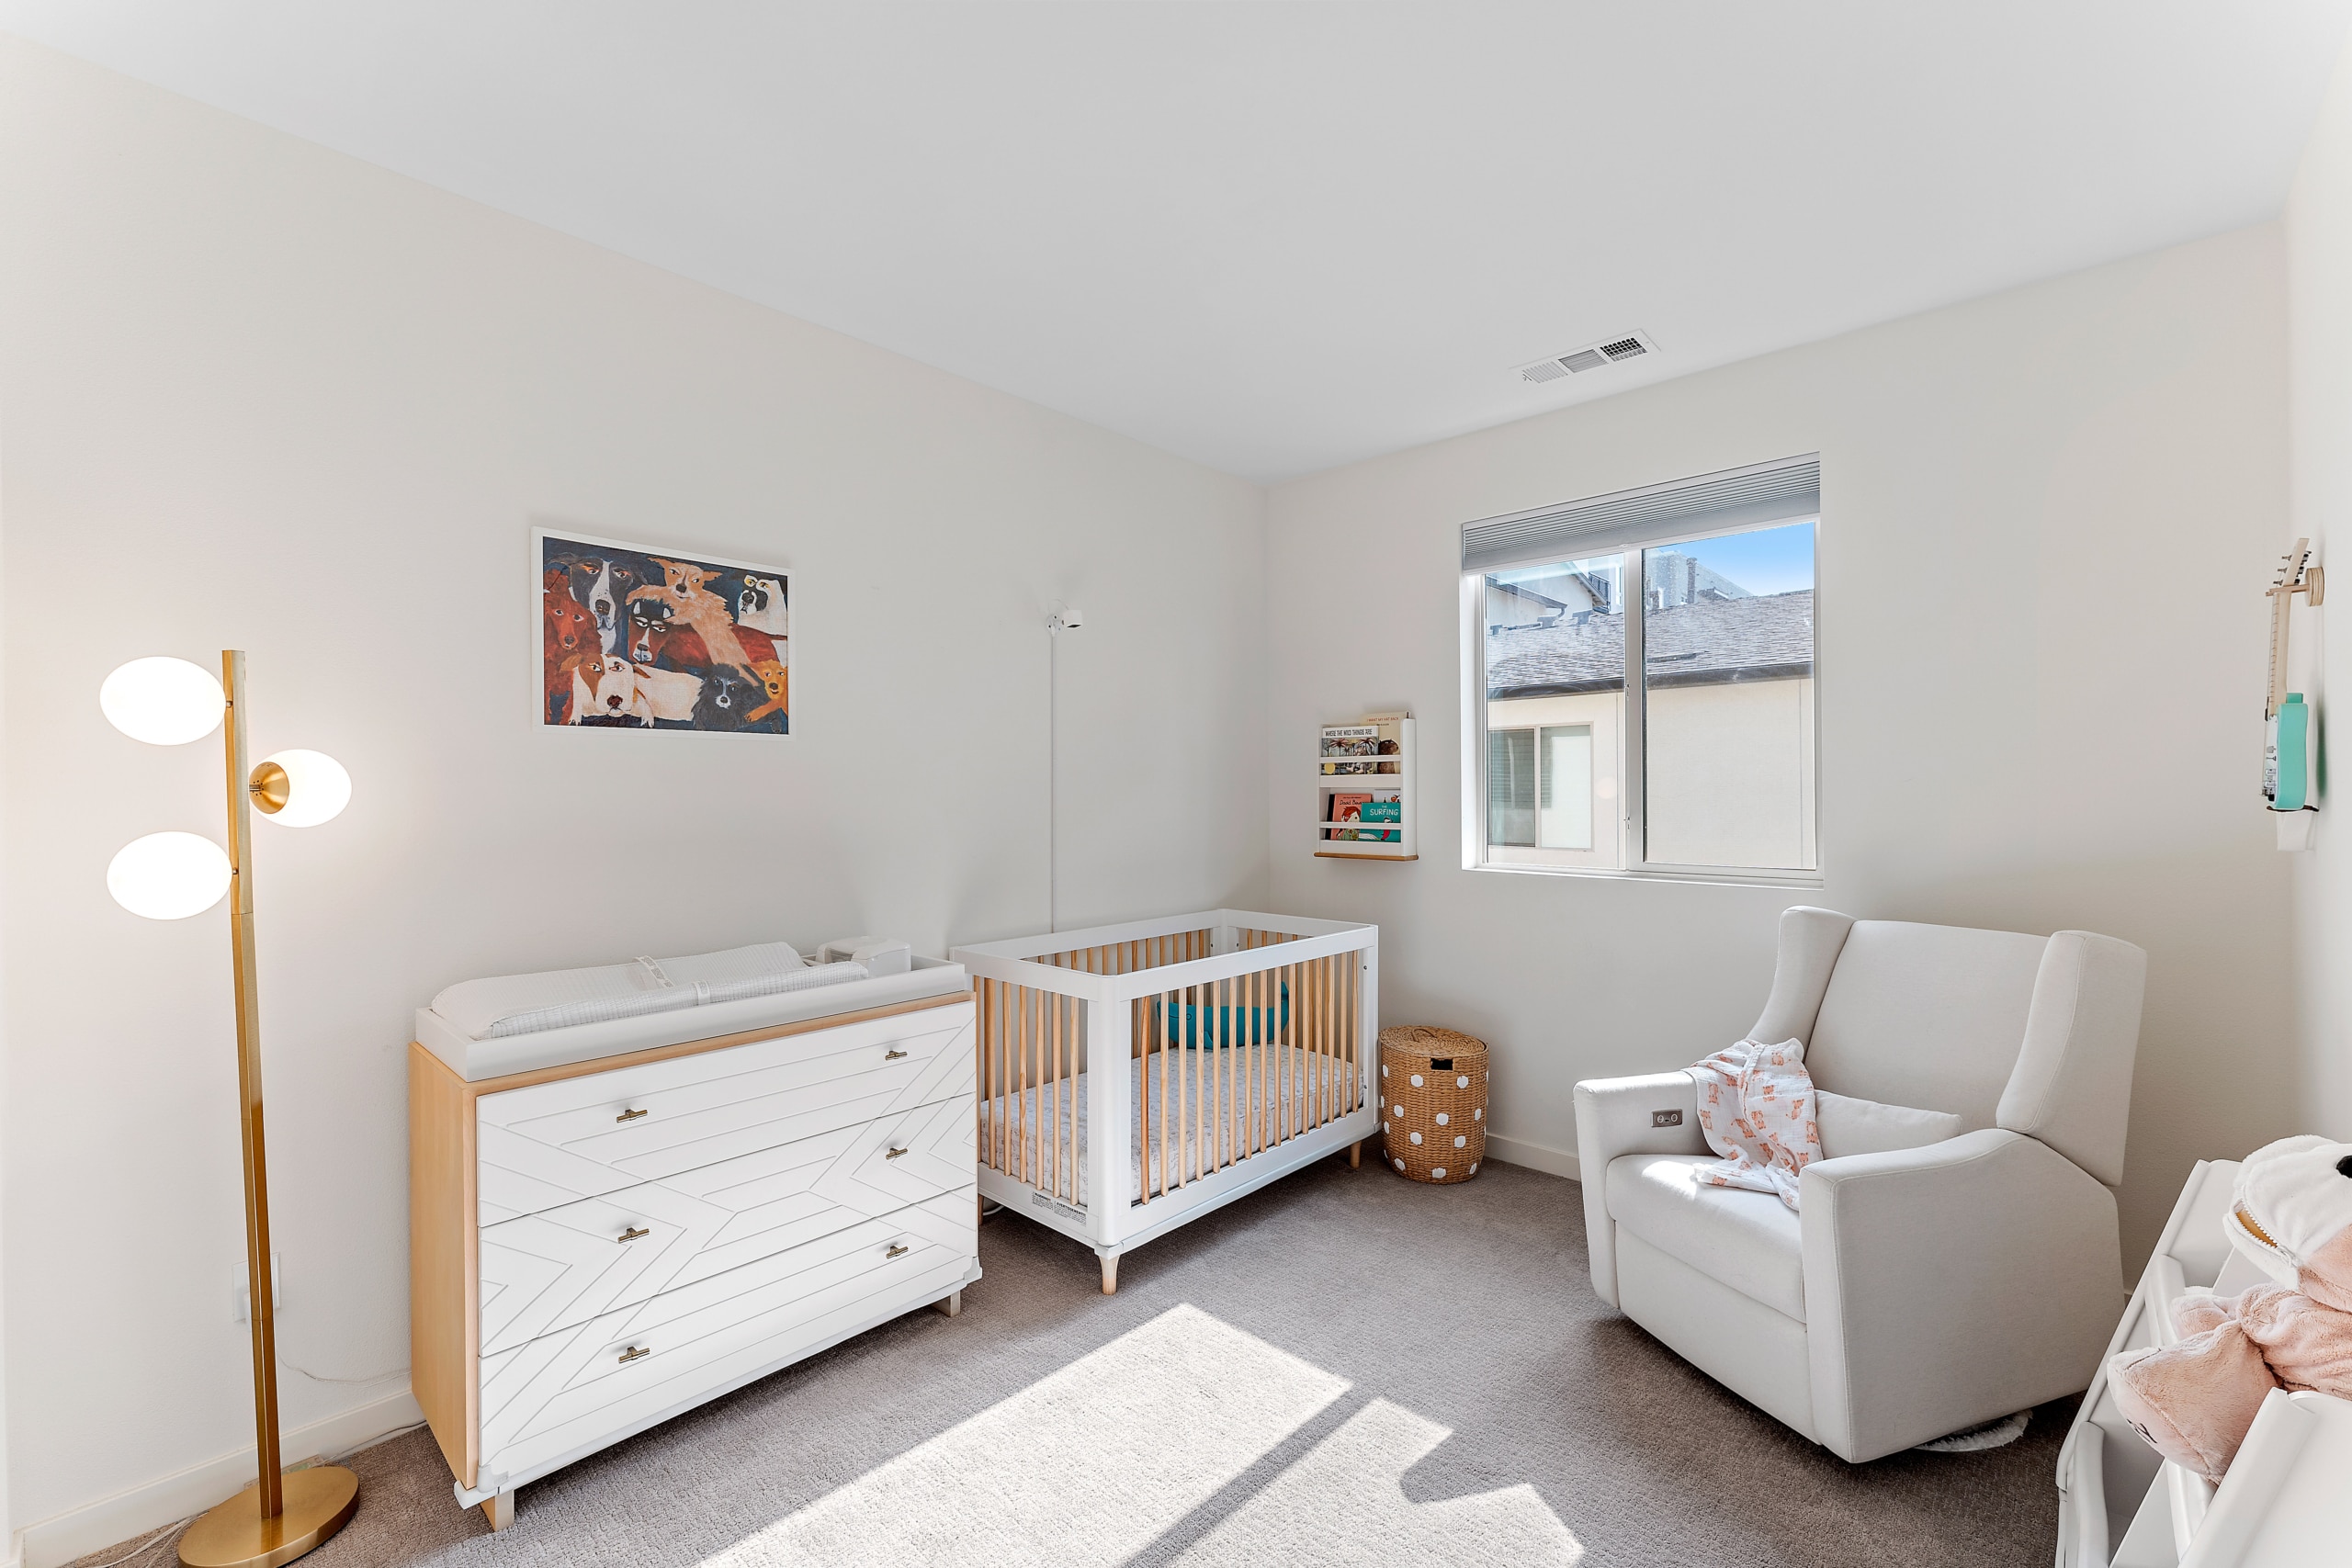 Mini baby's room with baby's court, arm chair, wall painting at 19531 Astor PL